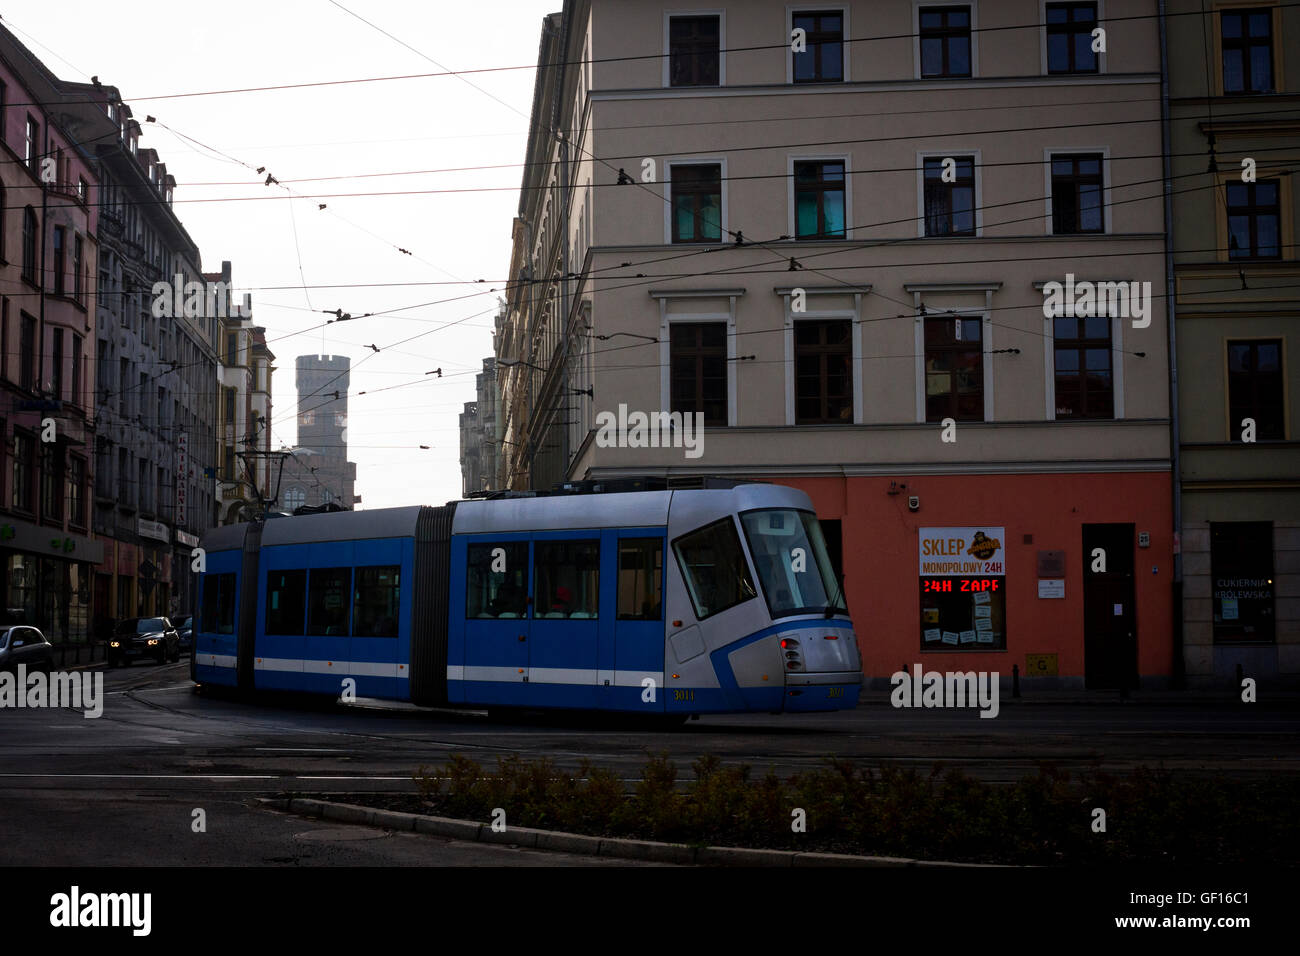 A tram turning at an intersection in Wroclaw, Poland. Stock Photo